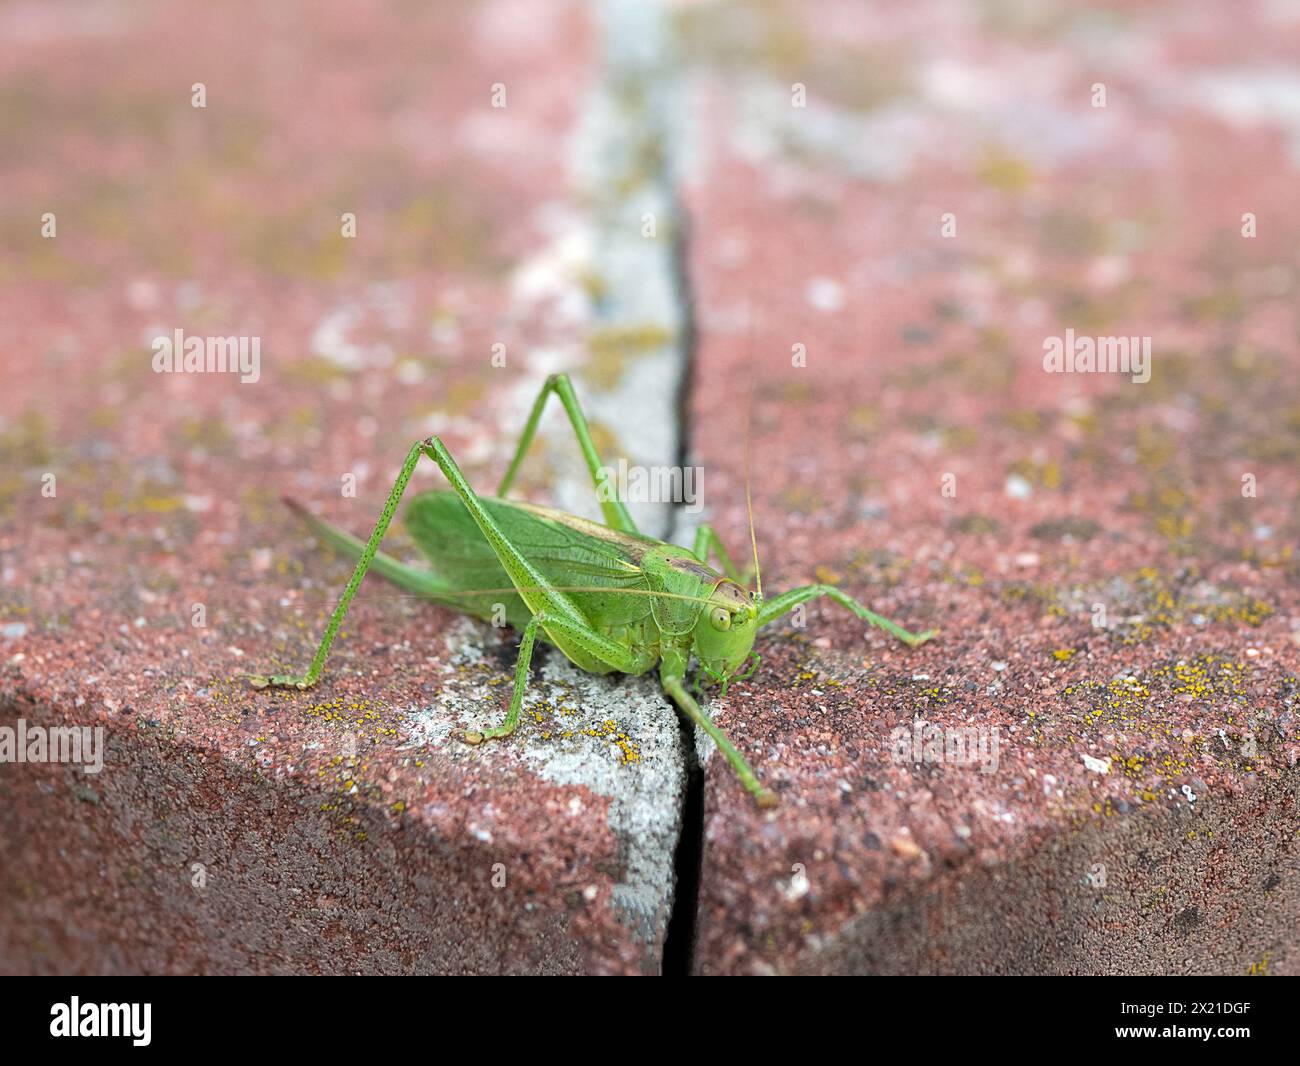 Bright green locust Tettigonia cantans on the concrete surface, selective focus. Insect in the urban space Stock Photo